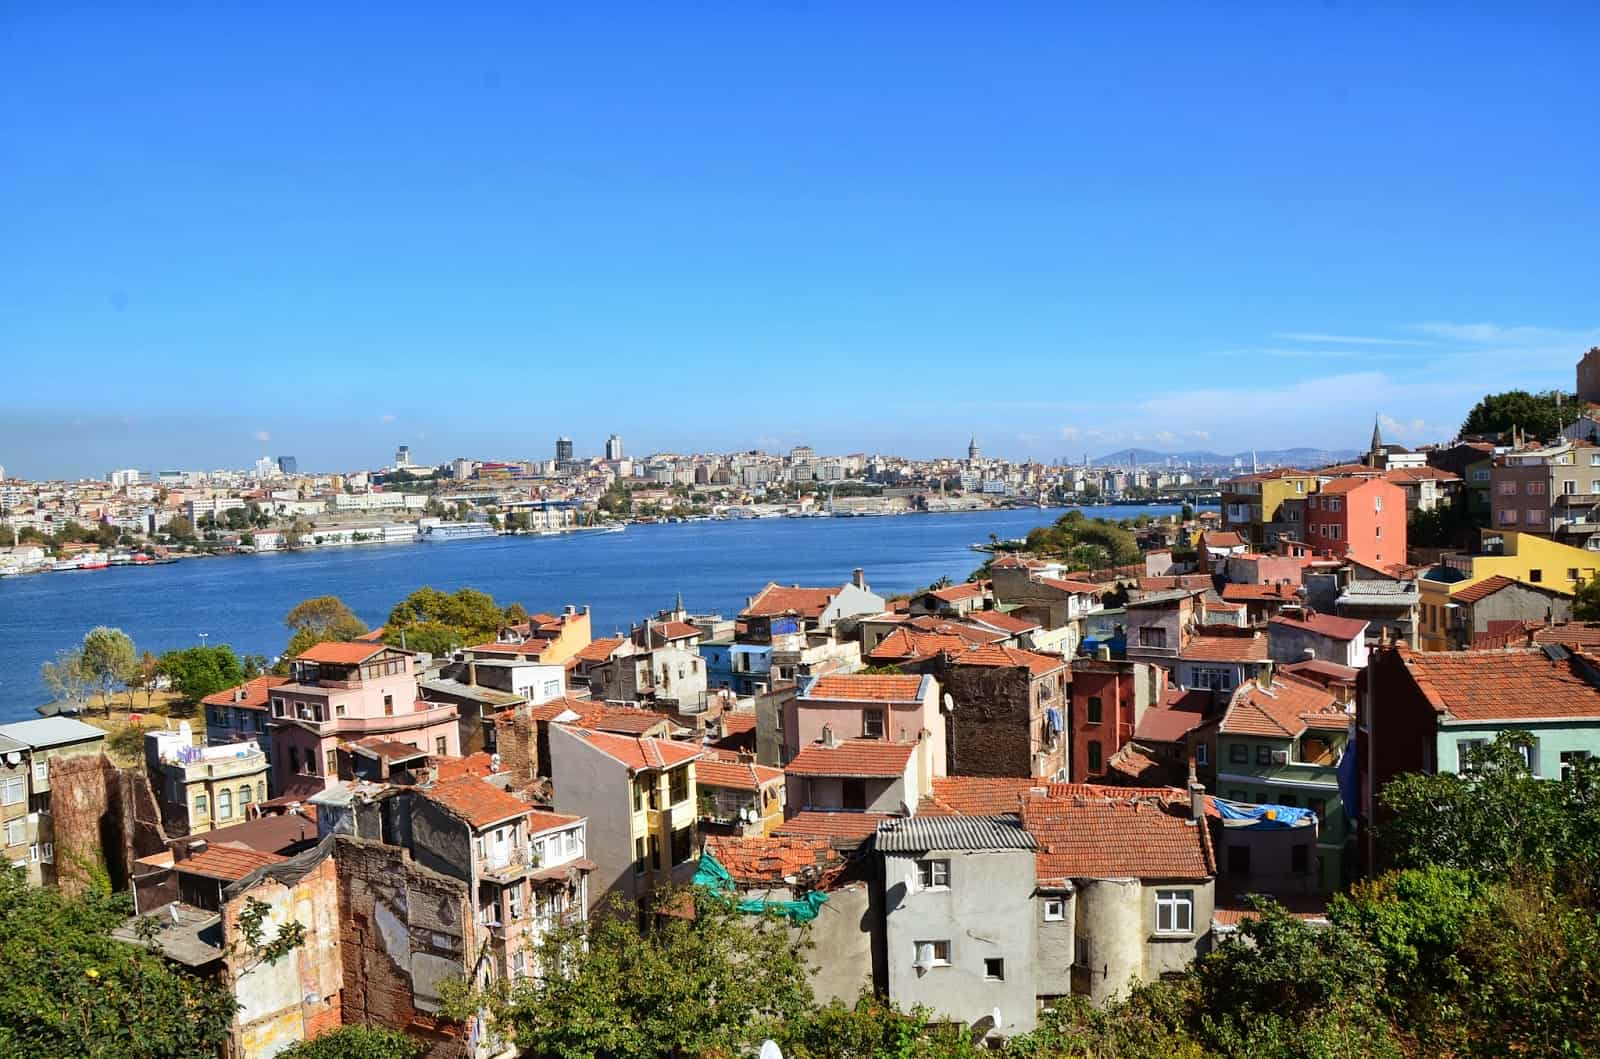 View of Fener and the Golden Horn from Ioakimion School for Girls in Fener, Istanbul, Turkey